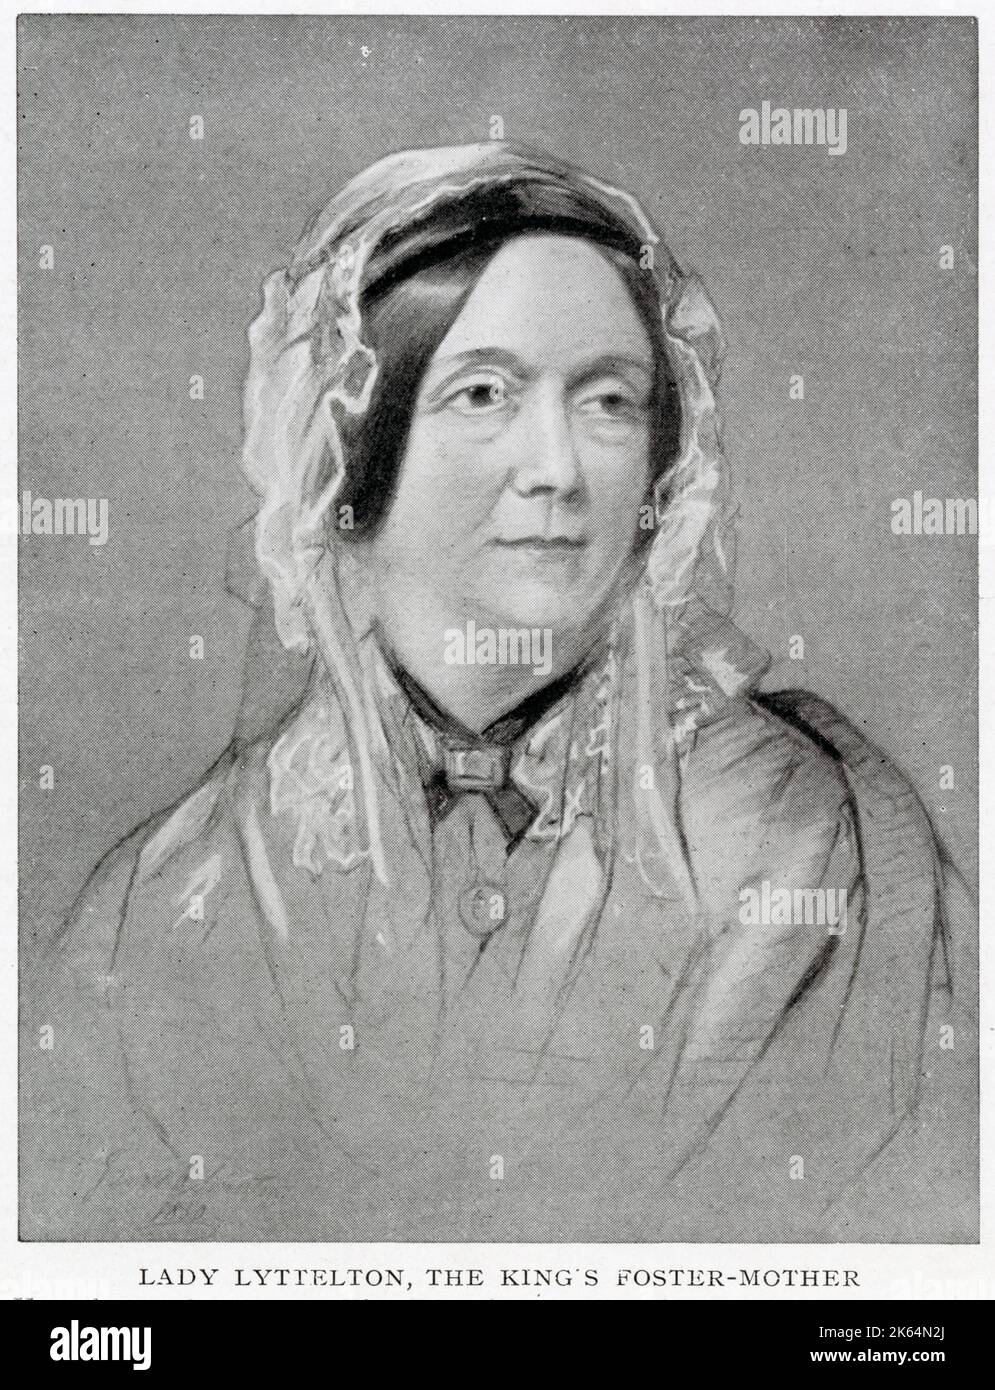 Sarah, Baroness Lytellton, (1787 - 1870), lady-in-waiting to Queen Victoria and much-loved governess to the Queen's children, including the future King Edward VII, who affectionately called her 'Laddle'. Born Sarah Spencer at Althorp, Northamptonshire, she was the daughter of George Spencer, 2nd Earl Spencer. She left Queen Victoria's service in 1850 following the death in childbirth of her daughter in order to care for her orphaned grandchildren. Stock Photo